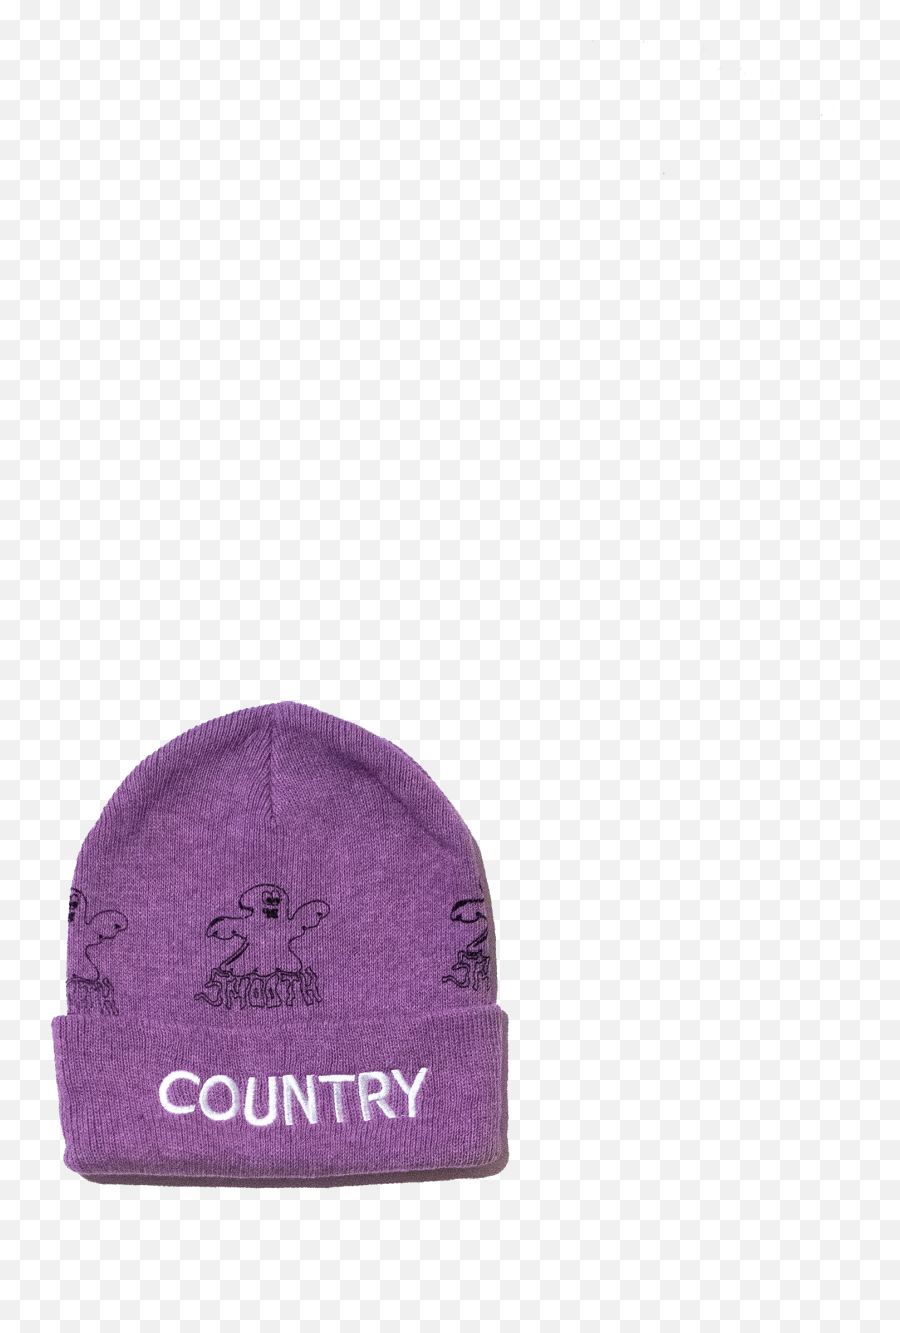 Download Image Of Purple Ghost Country Beanie - Beanie Png Beanie Emoji,Emoji Beanie